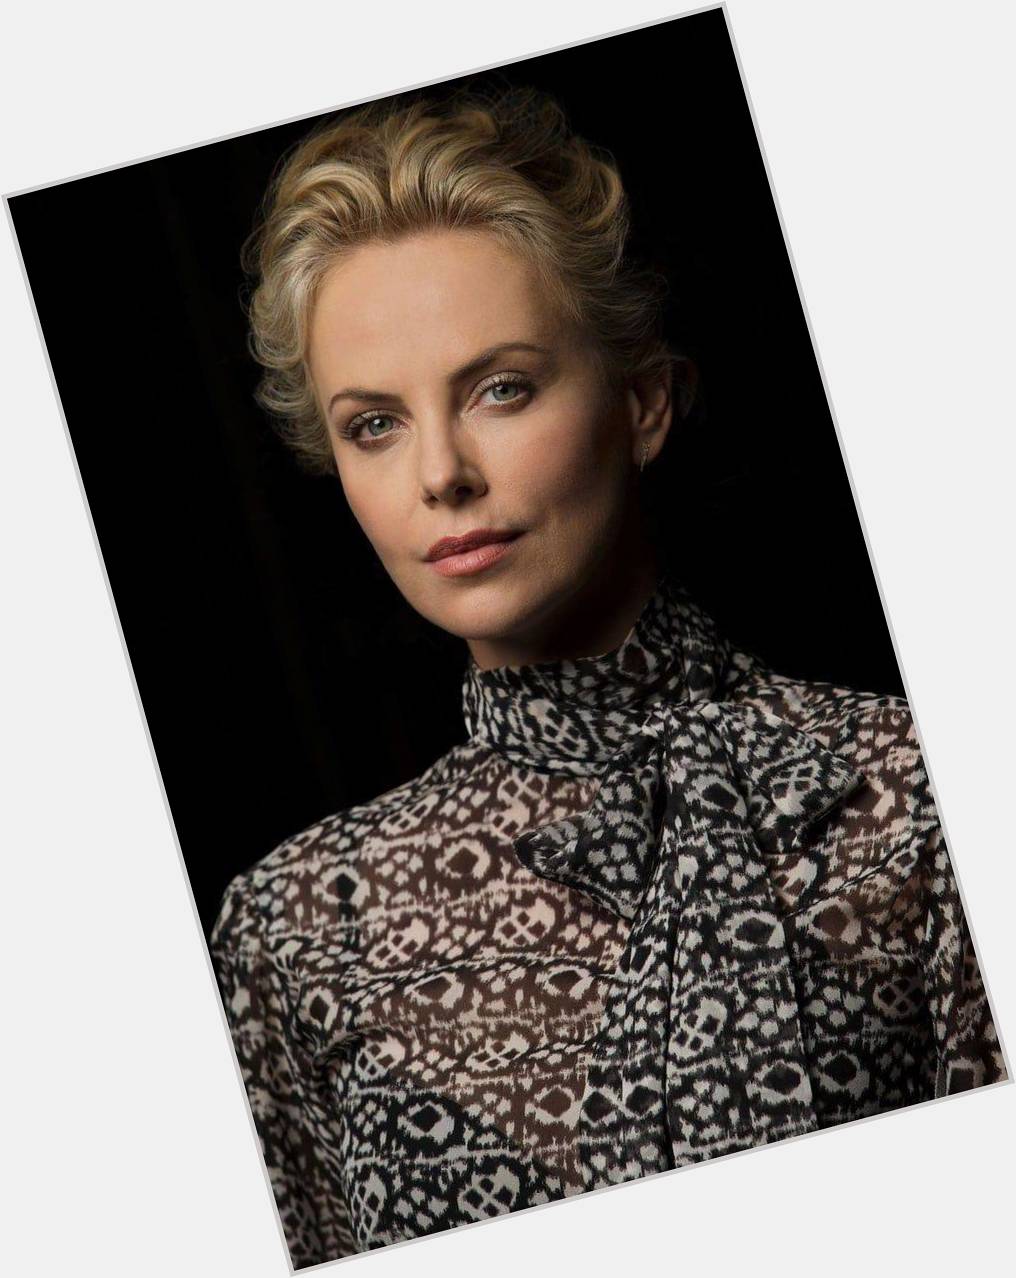 Happy birthday, Charlize Theron! The actress and film producer turns 43 today. 